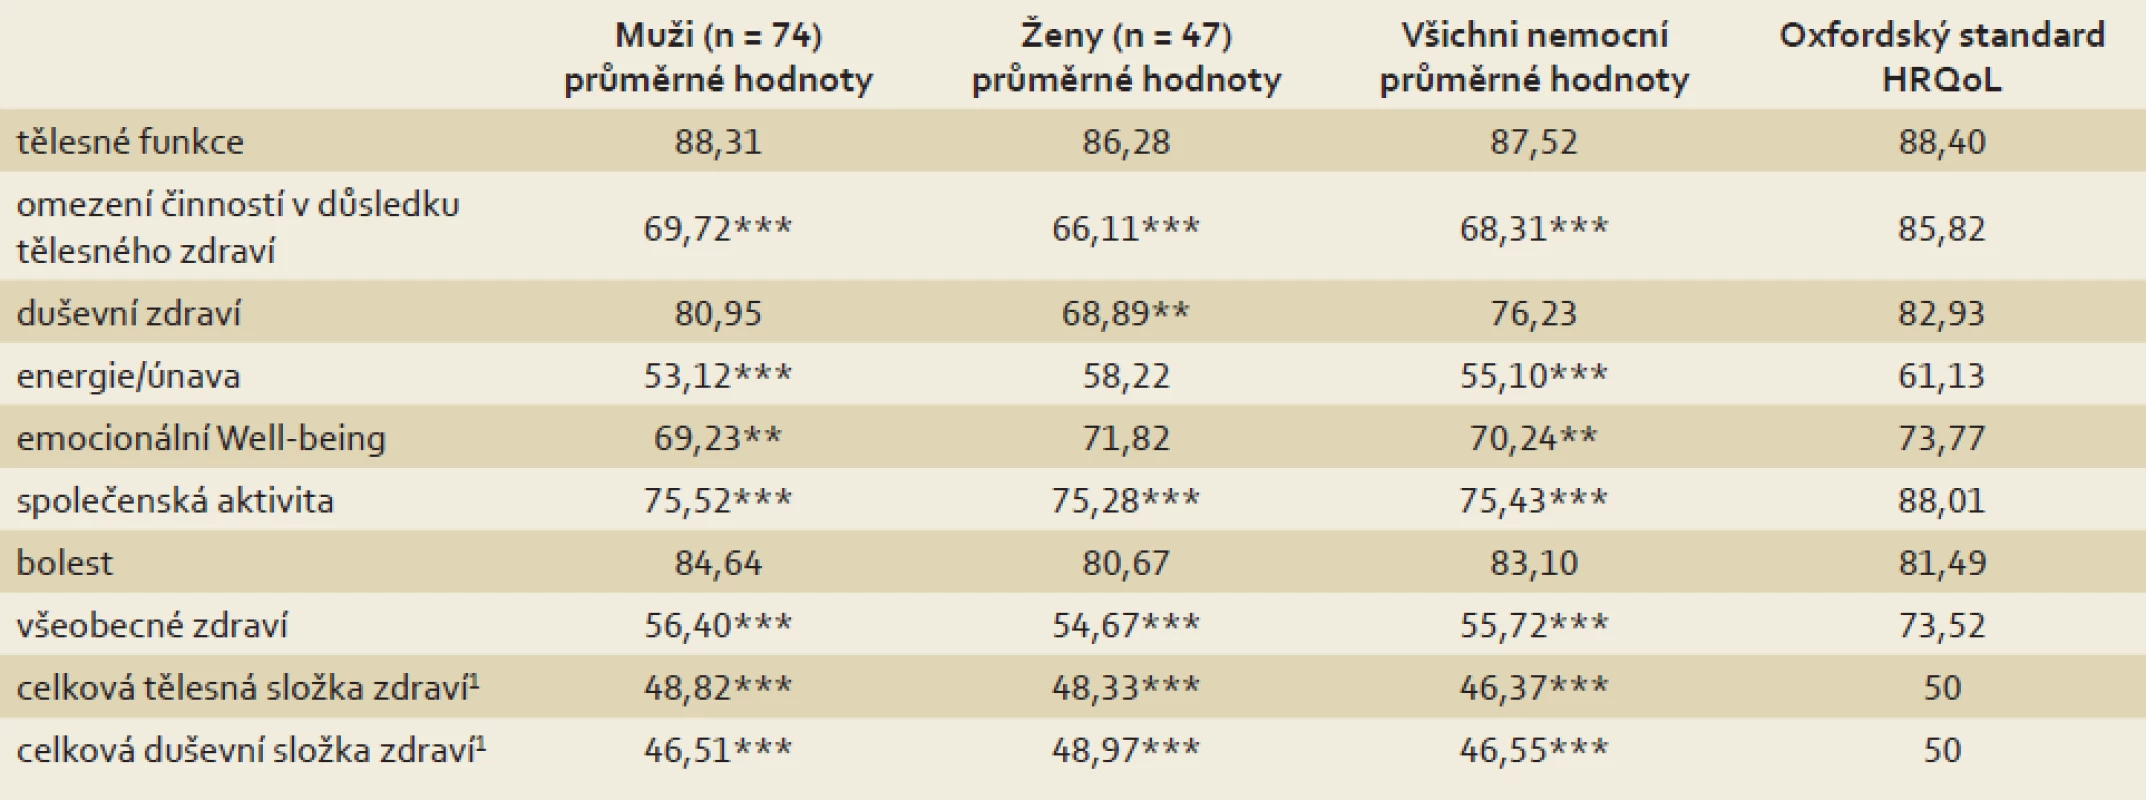 Skóre pro jednotlivé dimenze dotazníku SF-36 u nemocných pacientů (muži a ženy) po IPAA; medián sledování 7,9 (2,1–20,7) let.
Tab. 3. Mean scores for individual parameters of the SF-36 questionnaire in patients (men and women) who underwent IPAA, divided by age at pouch surgery; median follow-up 7.9 (2.1–20.7) years.